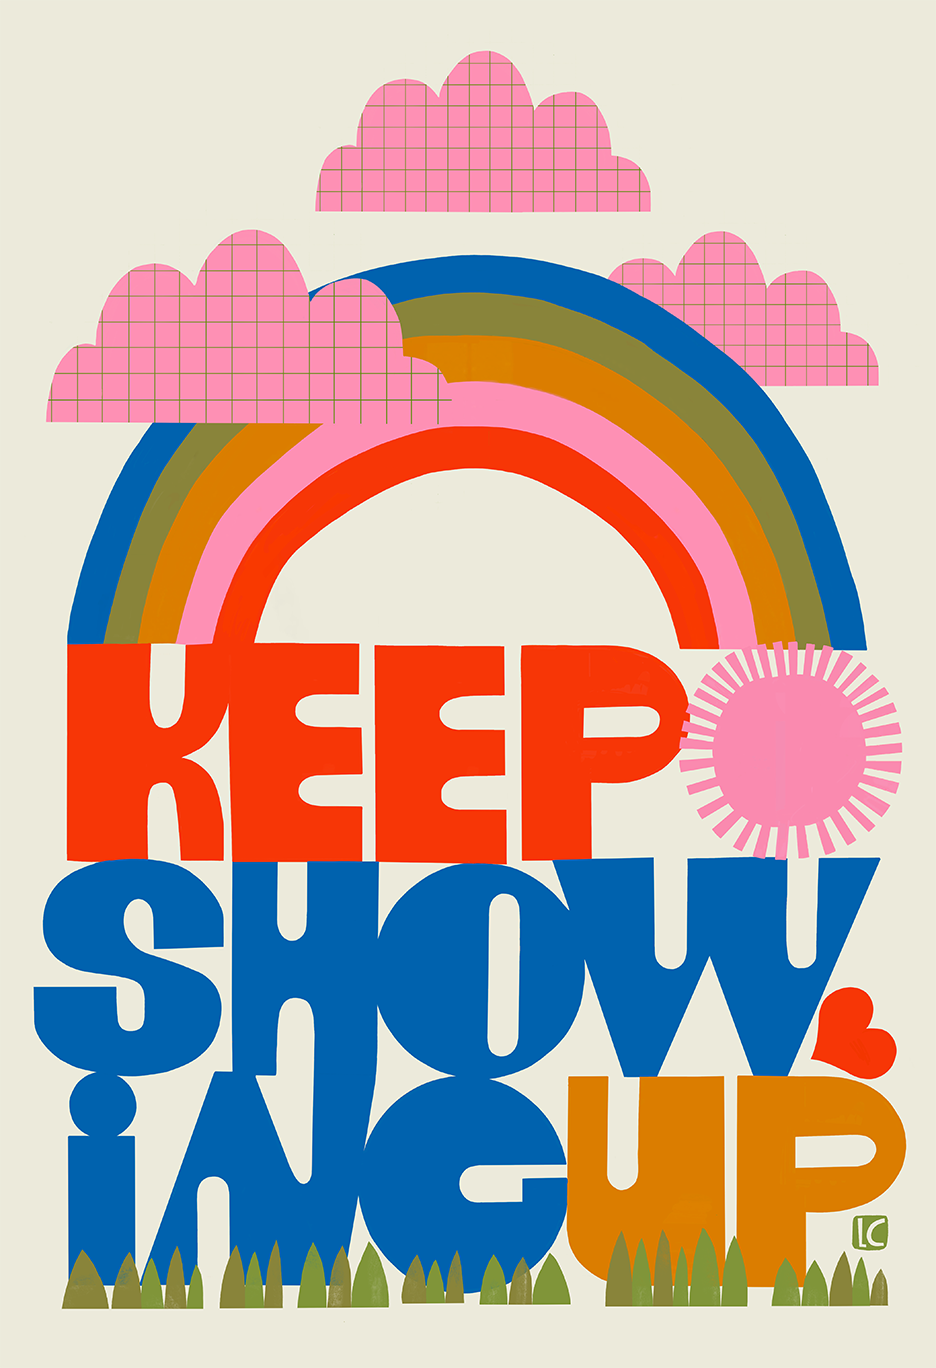 Keep Showing Up by Lisa Congdon